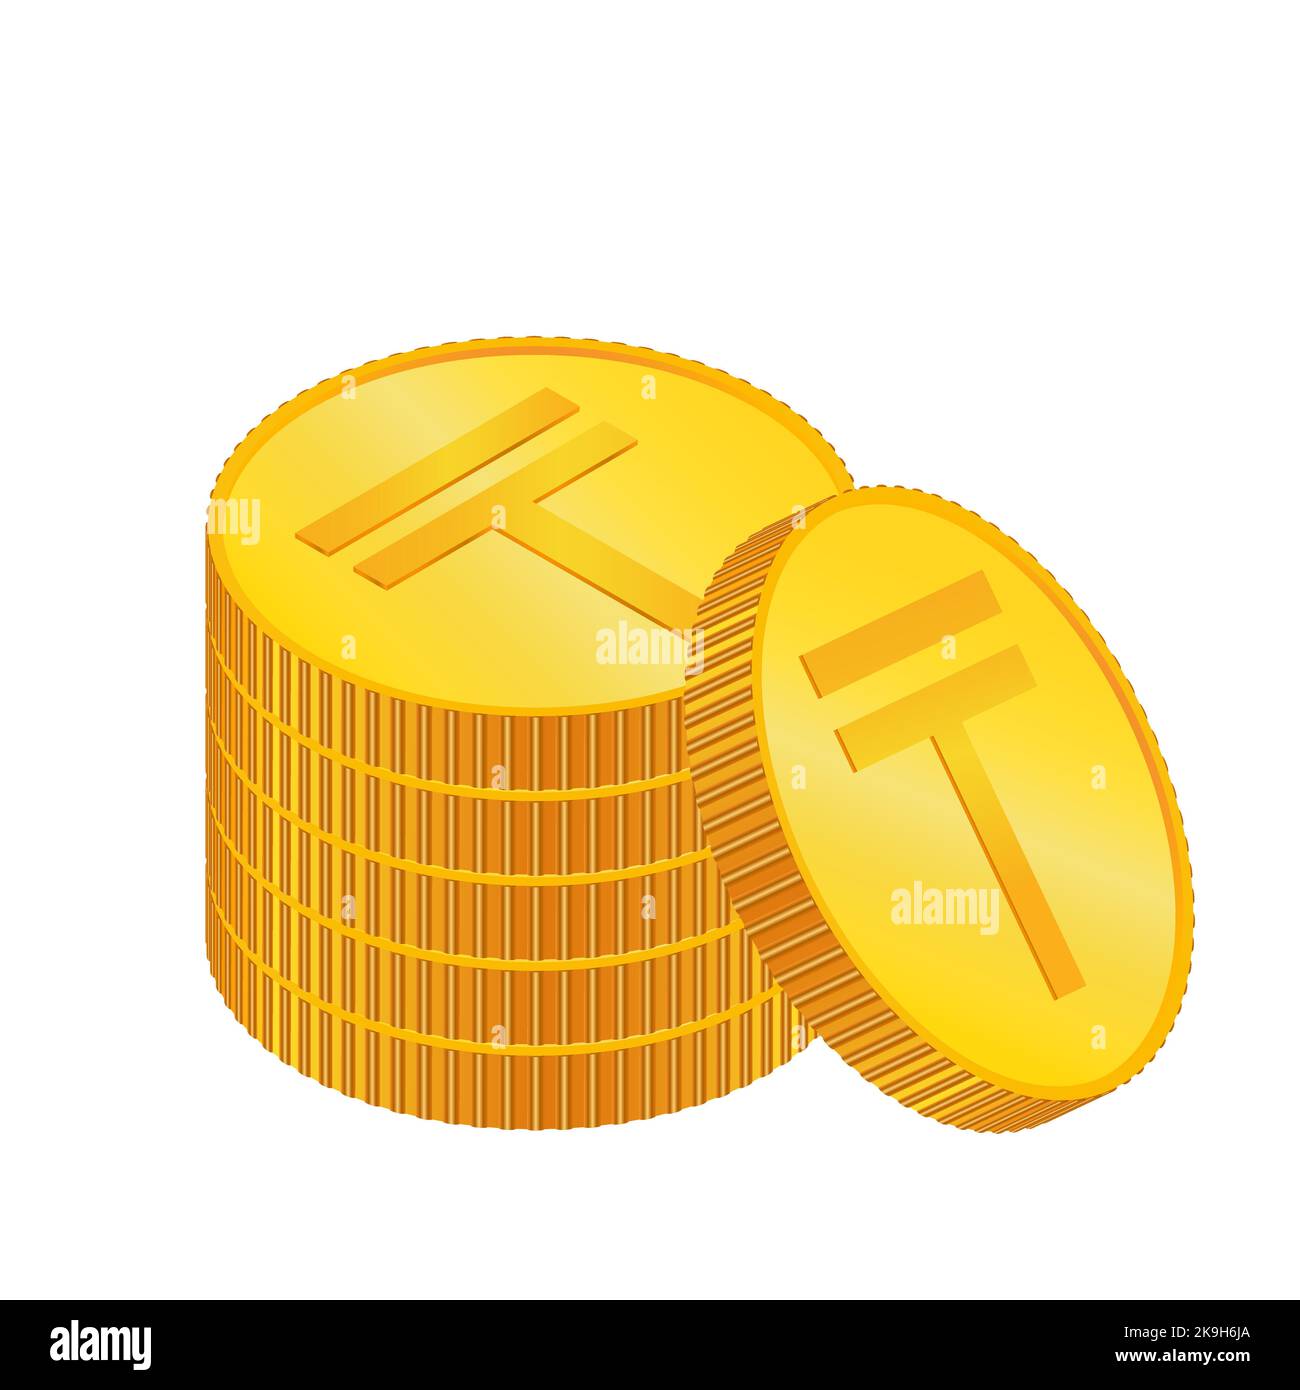 Tenge. 3D isometric Physical coins. Currency. Golden coins with Tenge symbol isolated on white background. Vector illustration. KZT. Stock Vector